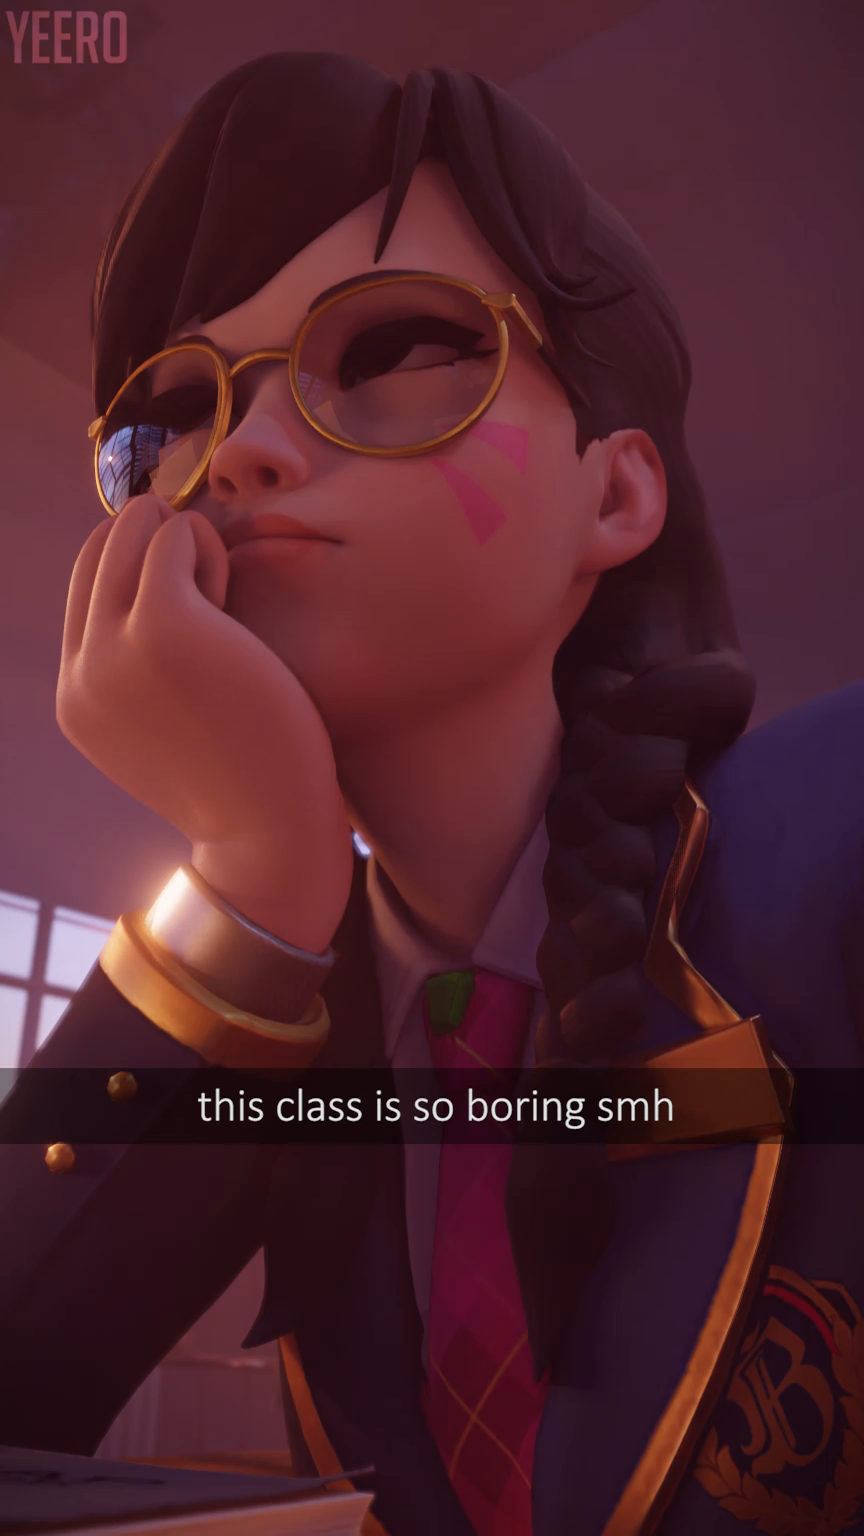 Video by sfmcompile with the username @sfmcompile, who is a brand user,  September 27, 2019 at 4:16 PM. The post is about the topic Hentai and the text says 'Dva Bored In Class Snapchat #overwatch #dva #teen #school #snapchat 
Go sfmcompile.club for more'